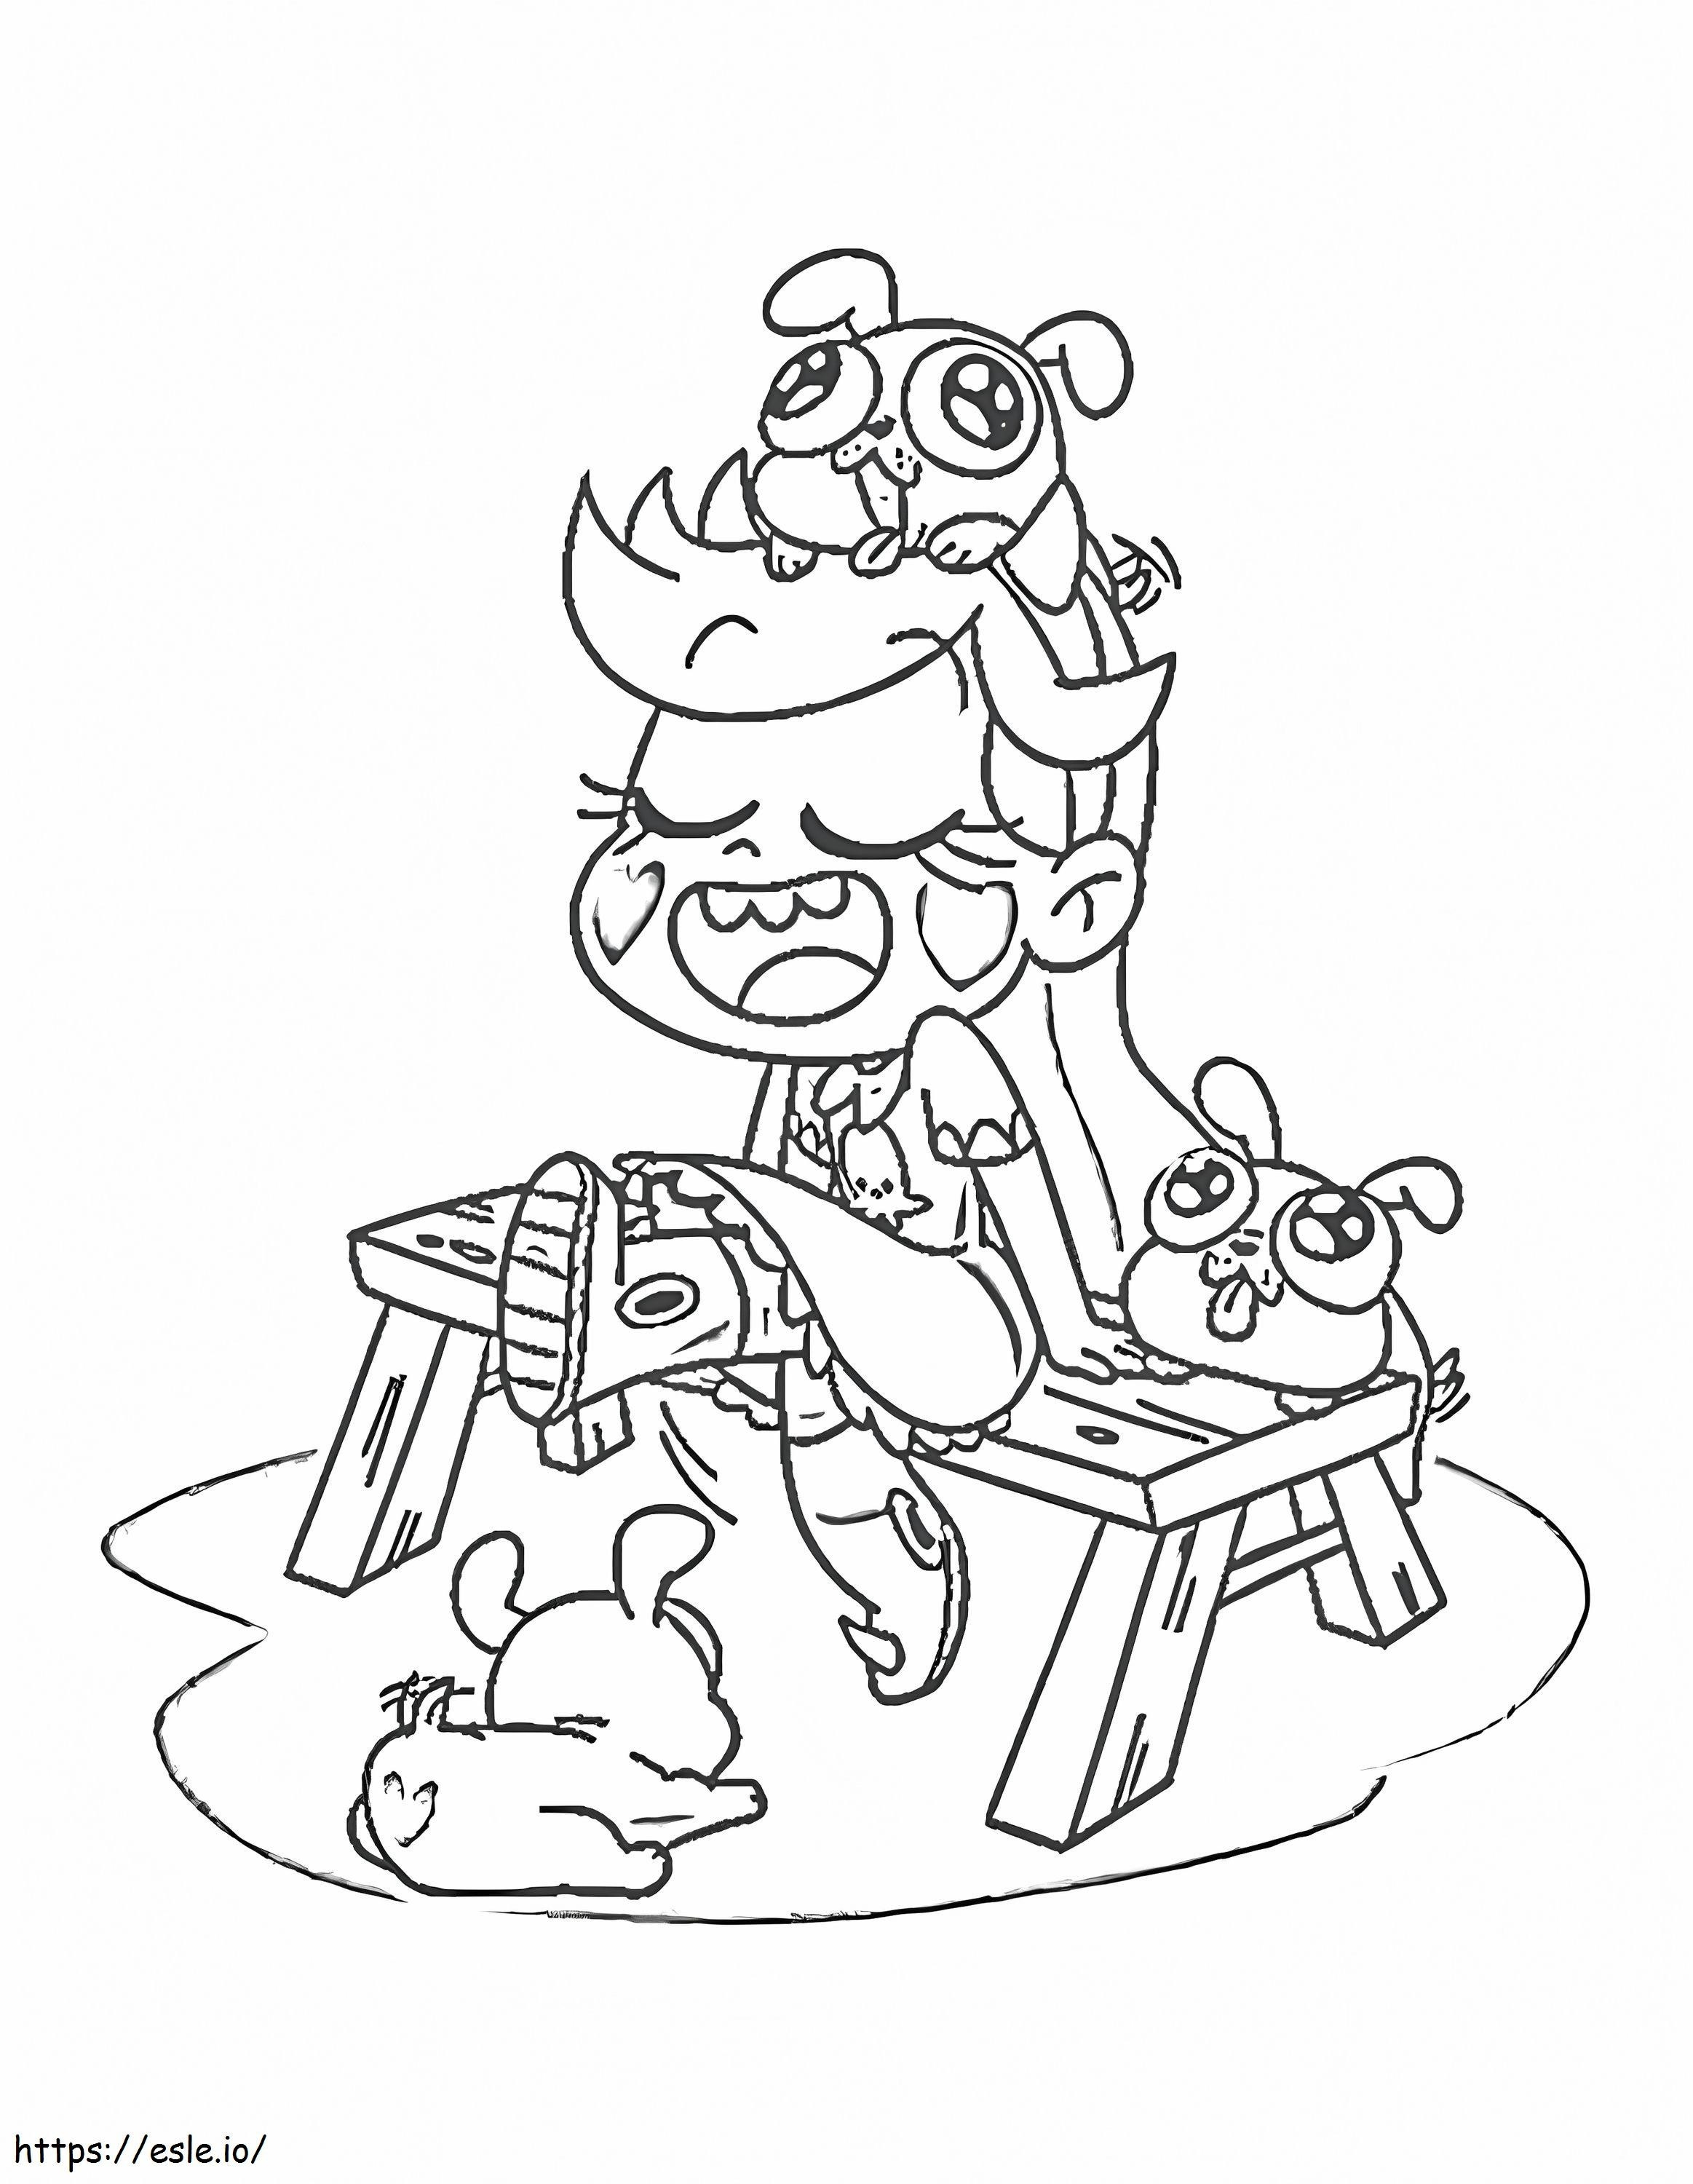 Cute Star Butterfly coloring page